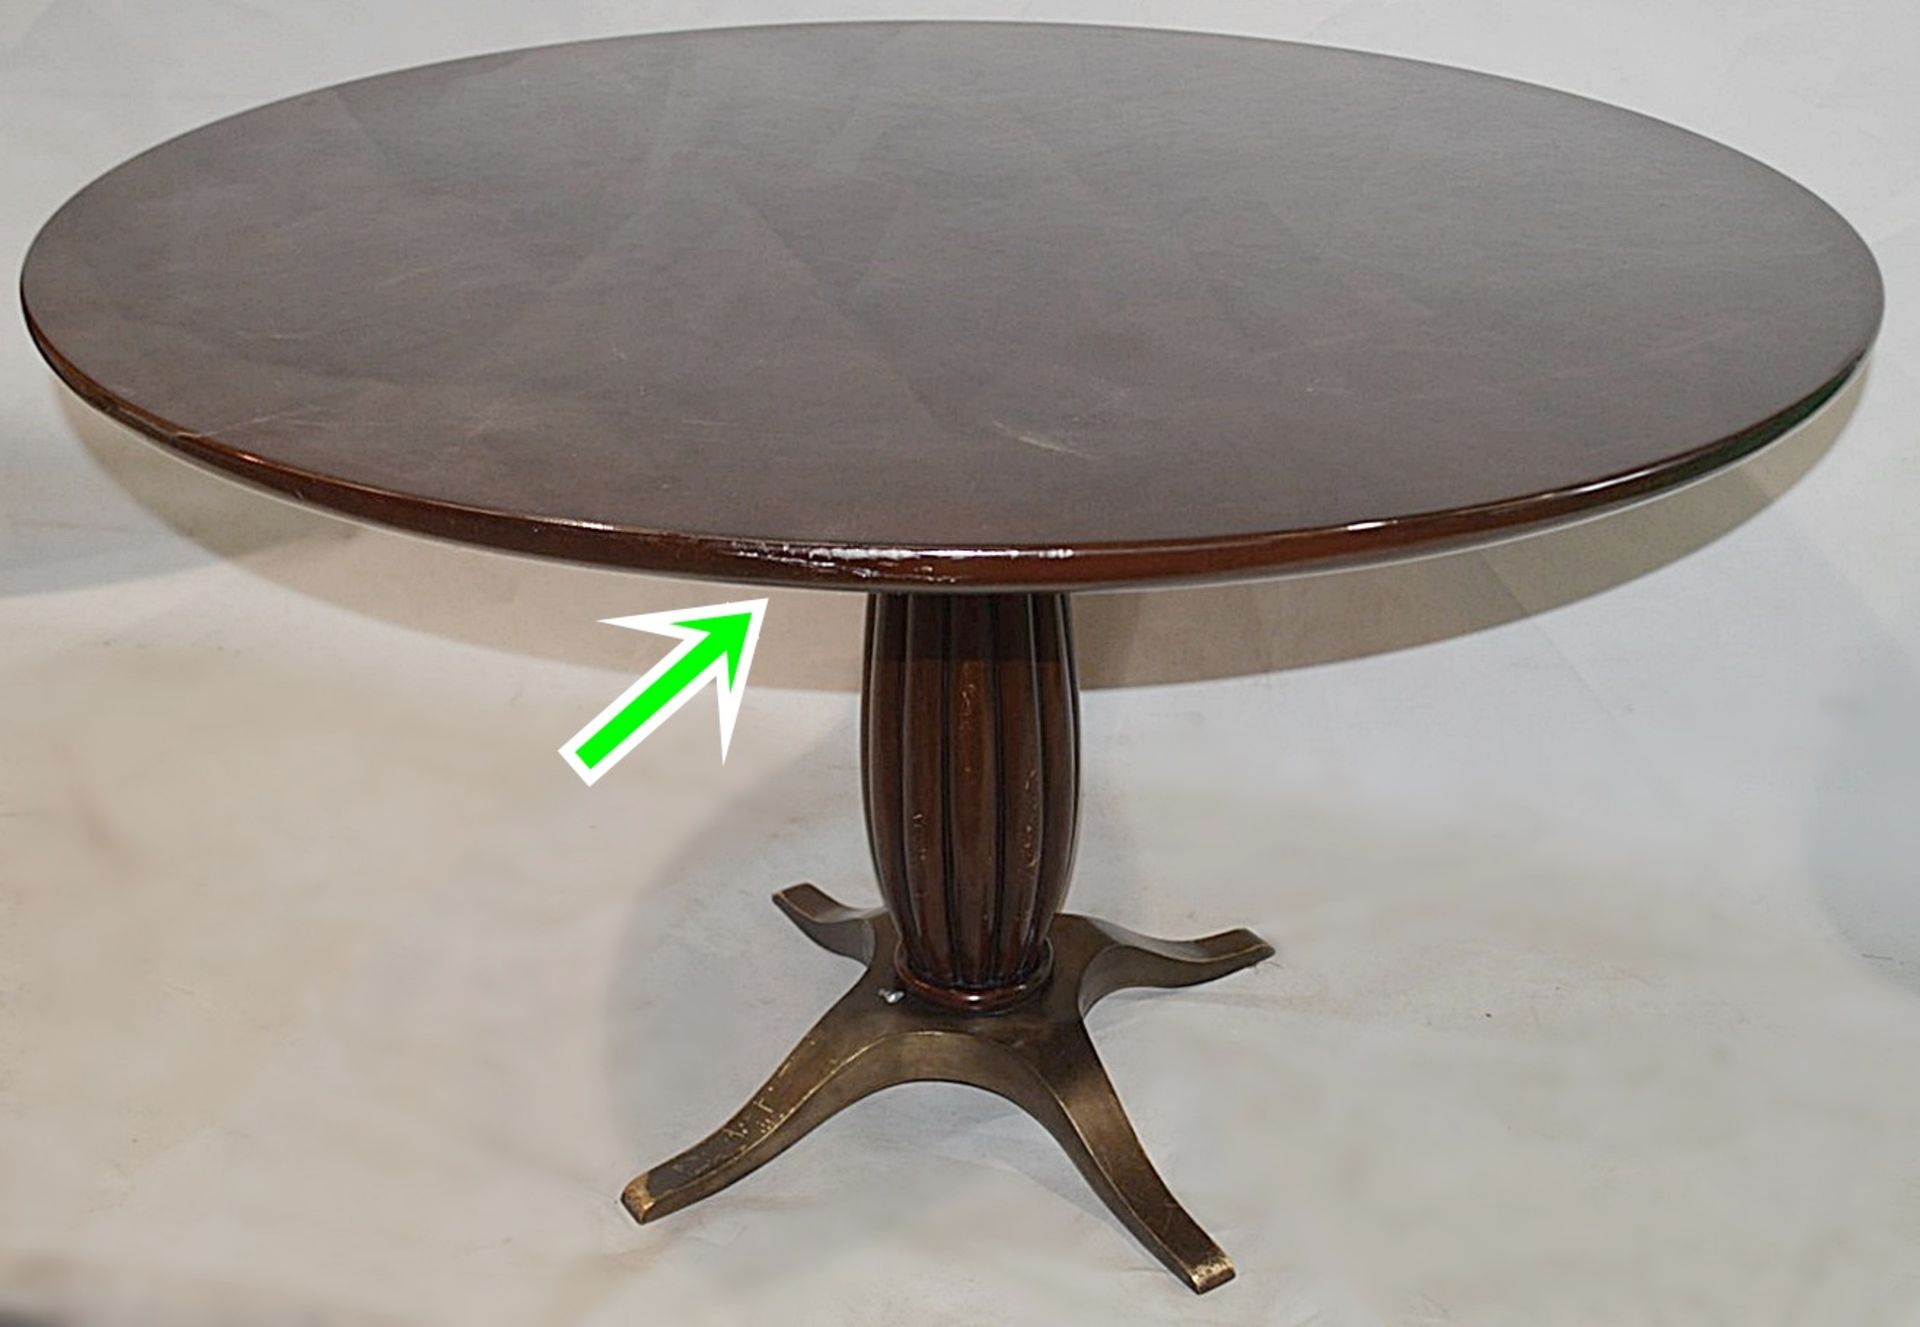 1 x Christopher Guy 'Toulouse' Round Georgian-Style Restaurant Dining Table - Original RRP £4,600.00 - Image 6 of 6